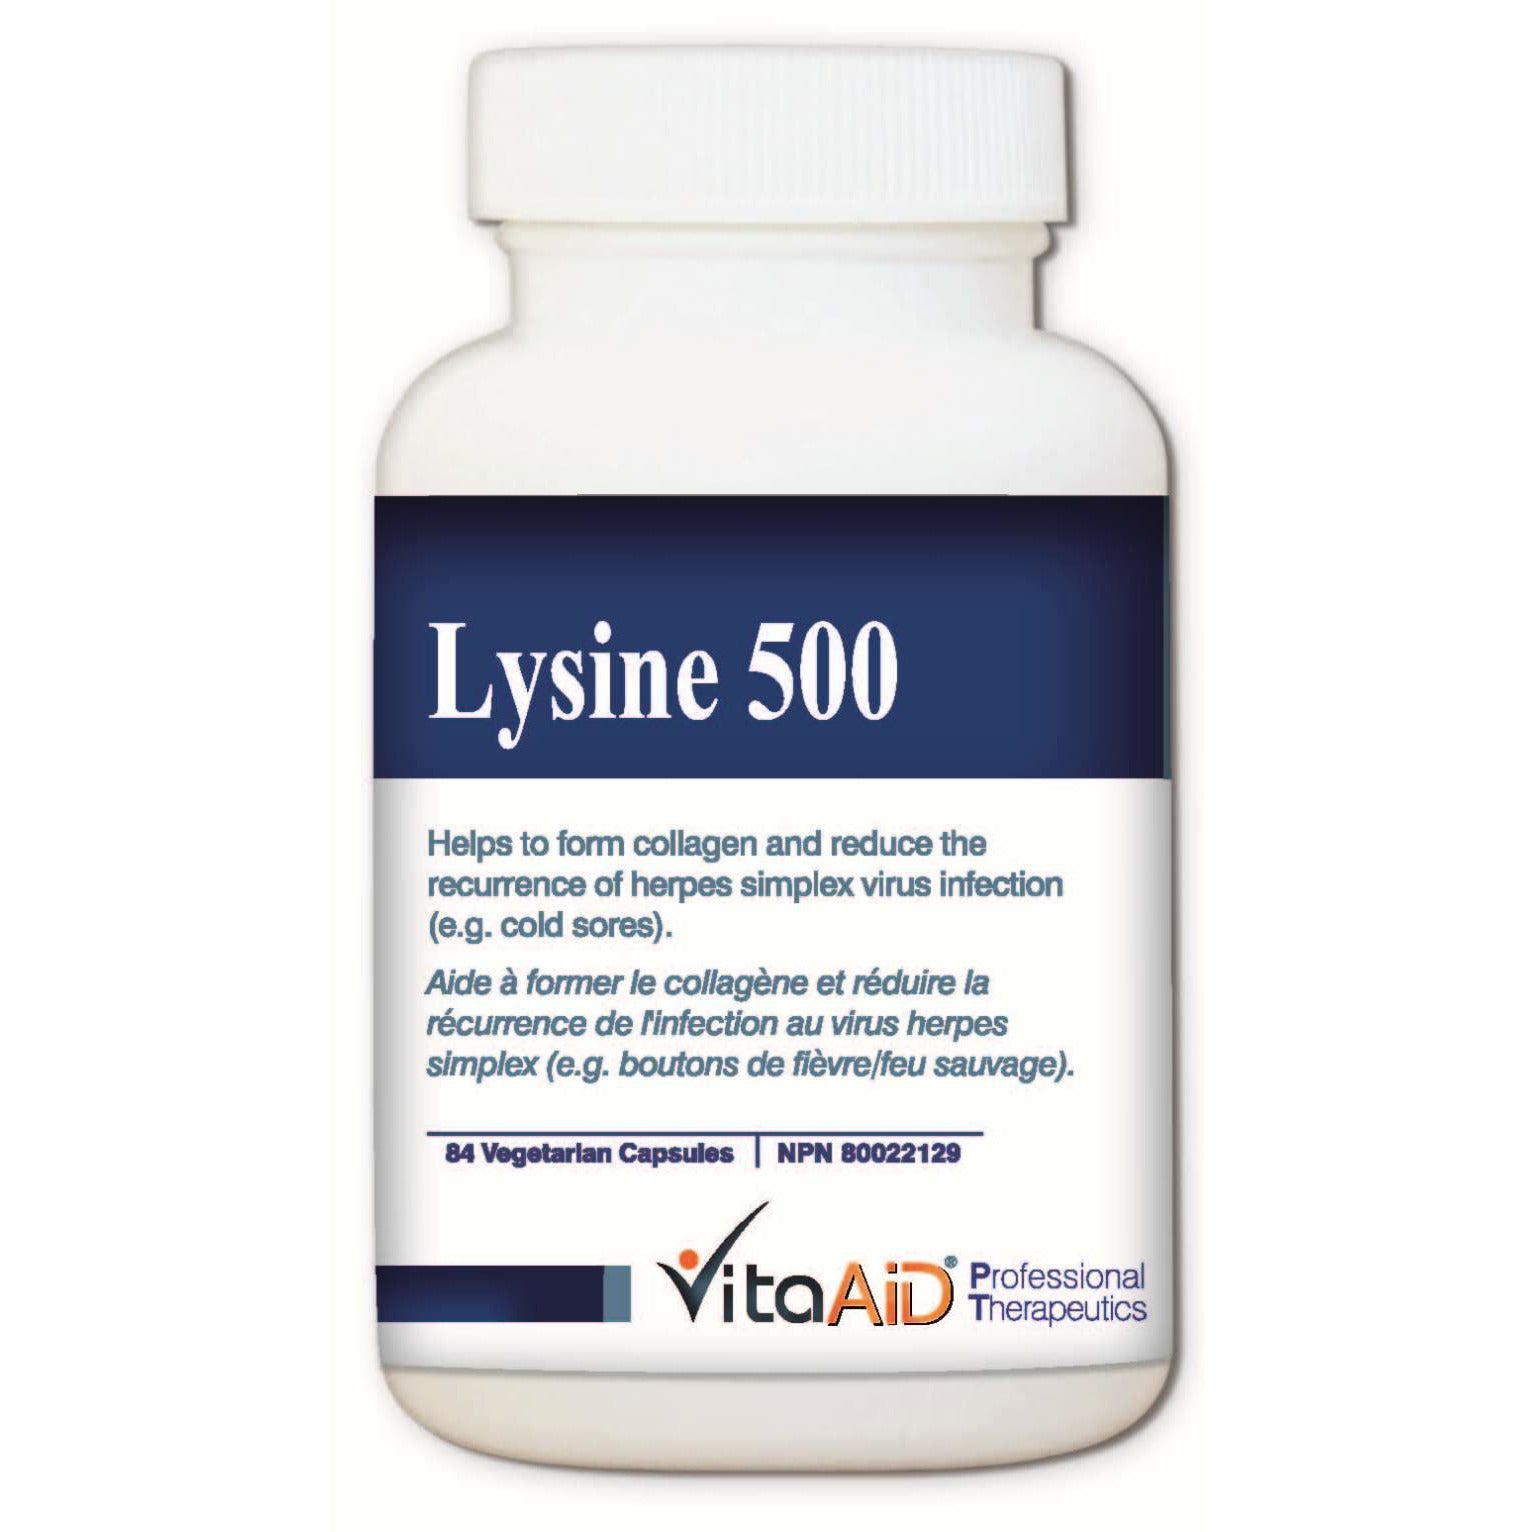 Lysine 500 Help reduce the recurrence of herpes simplex virus (HSV) infections (eg. cold sores) 84 veg caps - iwellnessbox